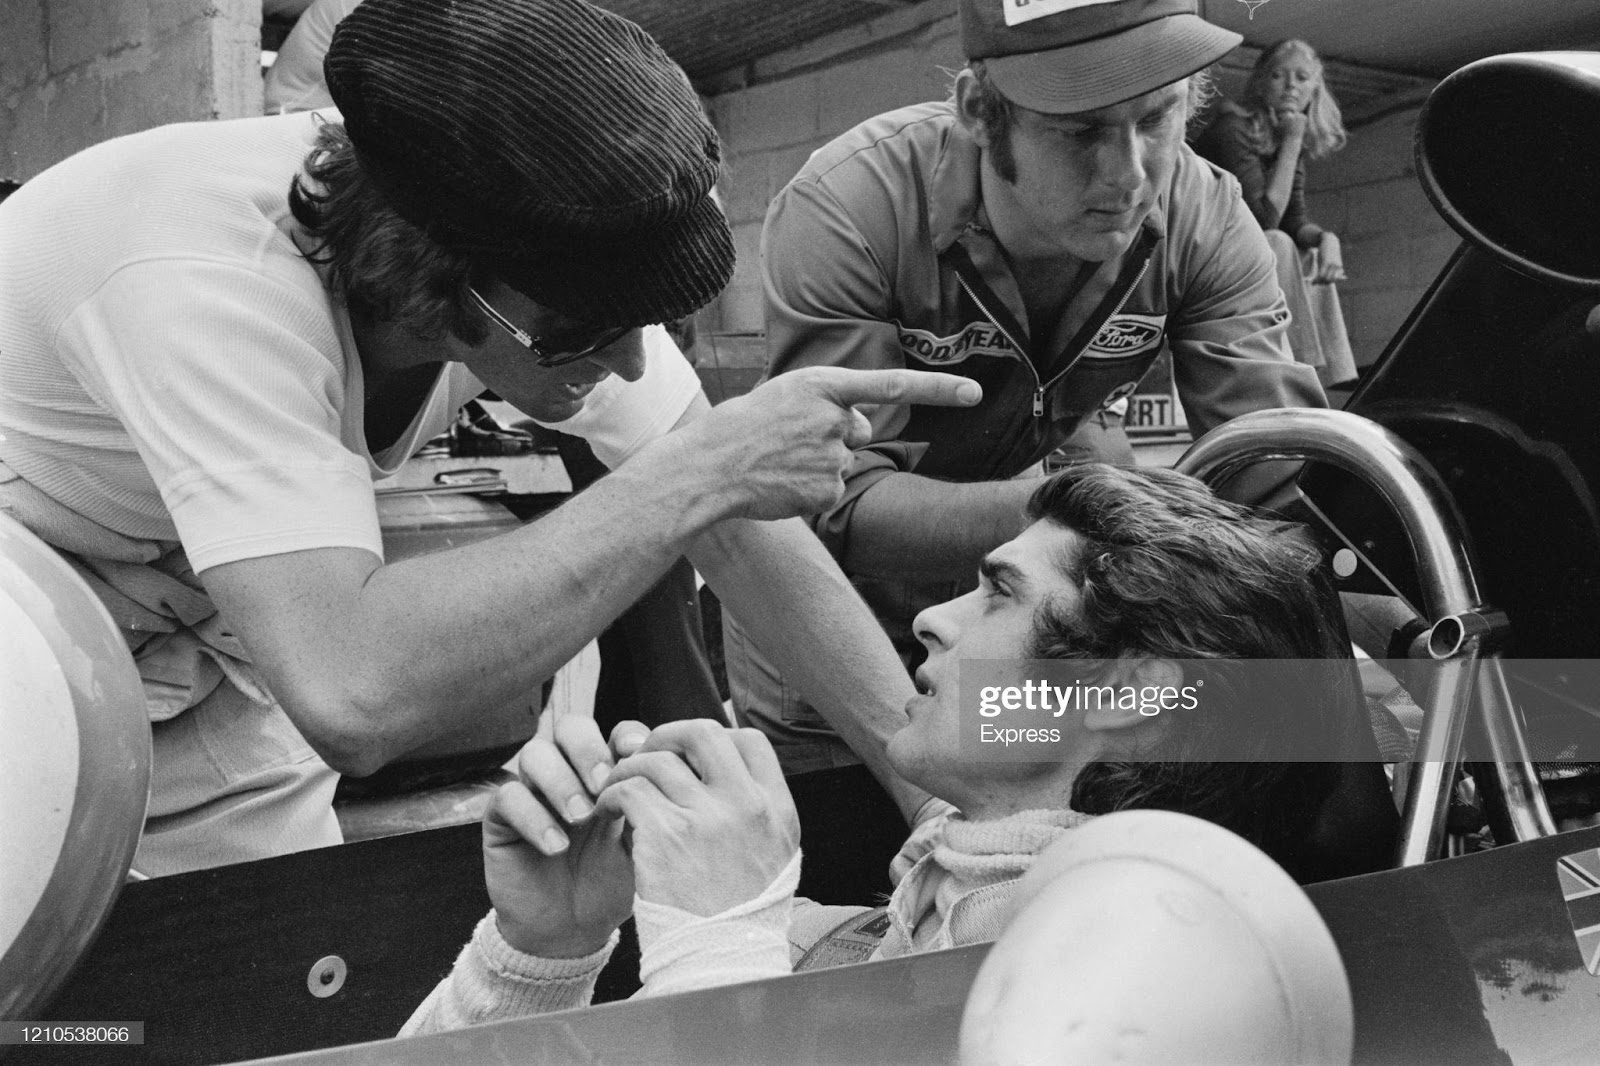 Jackie Stewart in conversation with his Tyrrell teammate Francois Cevert during practice for the 1972 British Grand Prix at the Brands Hatch motor racing circuit in West Kingsdown, Kent, England, 12th July 1972.